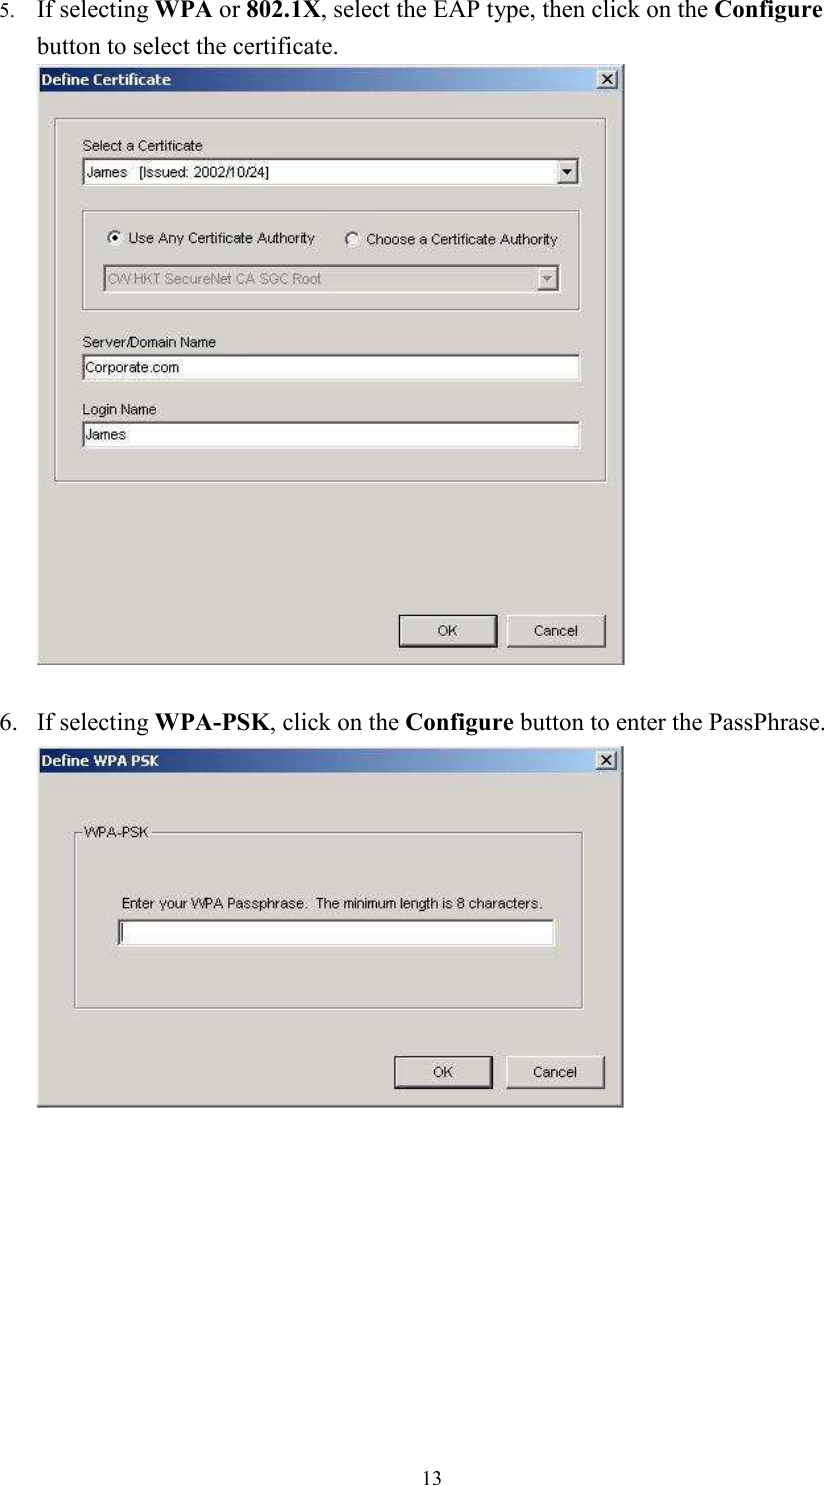 135.If selecting WPA or 802.1X, select the EAP type, then click on the Configure button to select the certificate.6. If selecting WPA-PSK, click on the Configure button to enter the PassPhrase. 